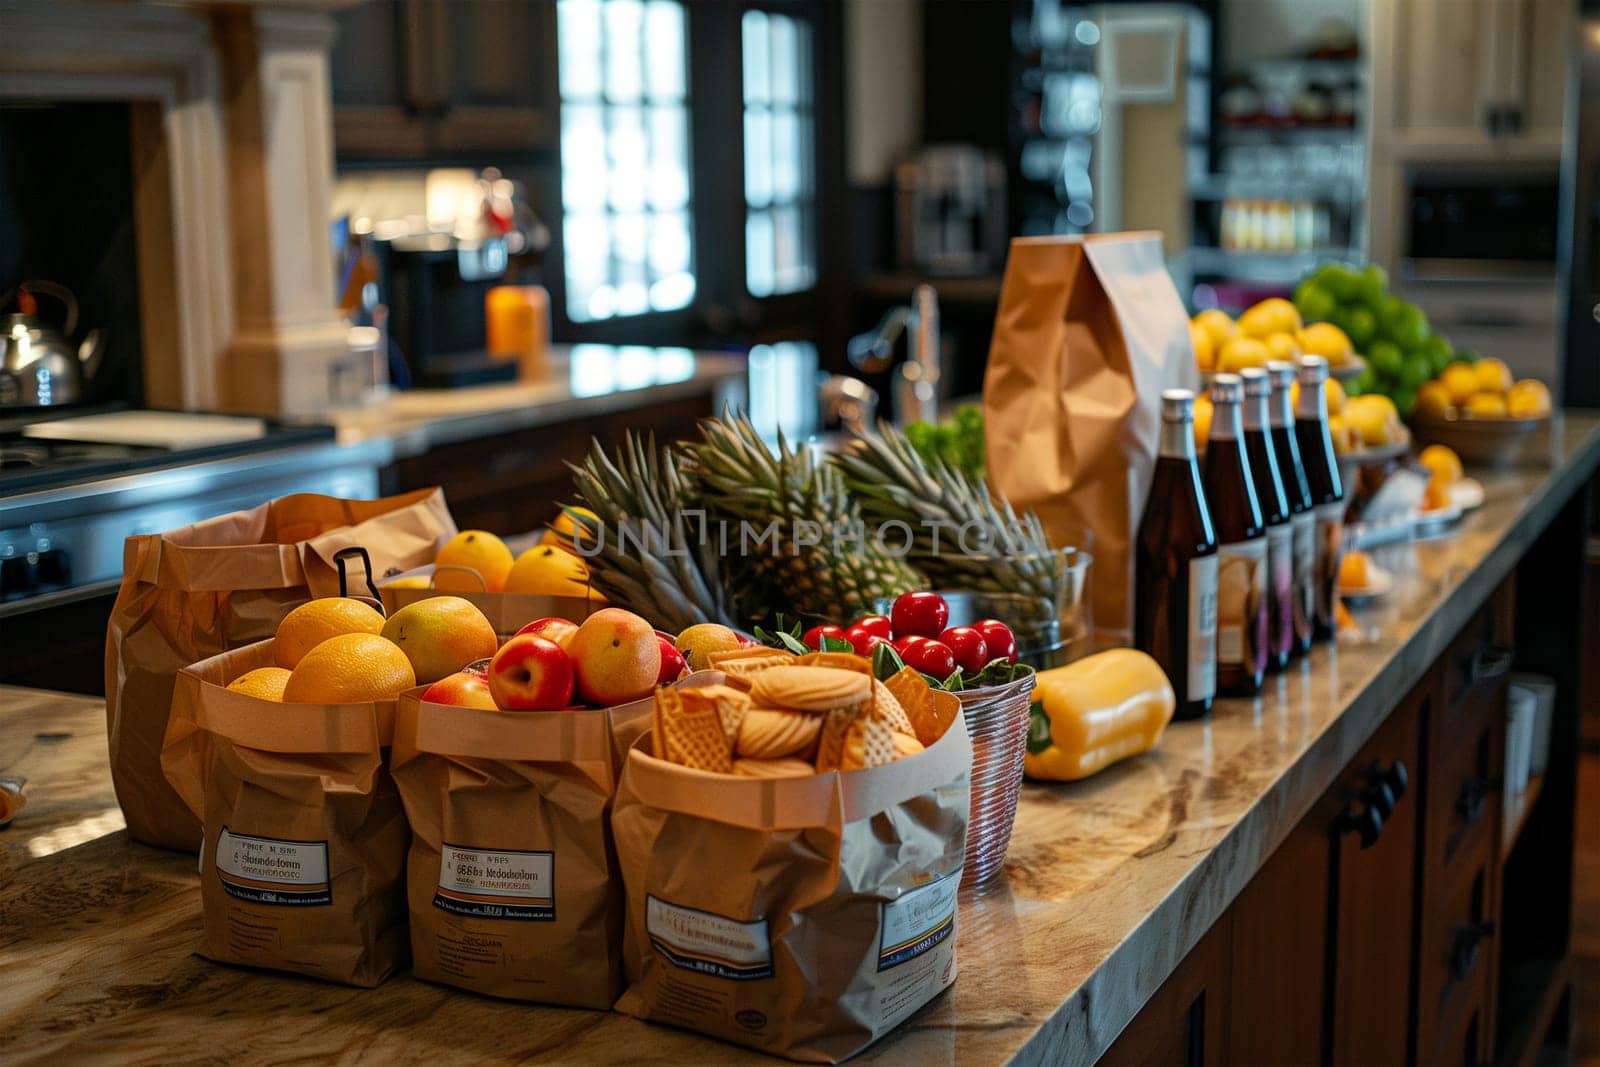 Food and drinks are arranged in paper bags and boxes on the kitchen island.